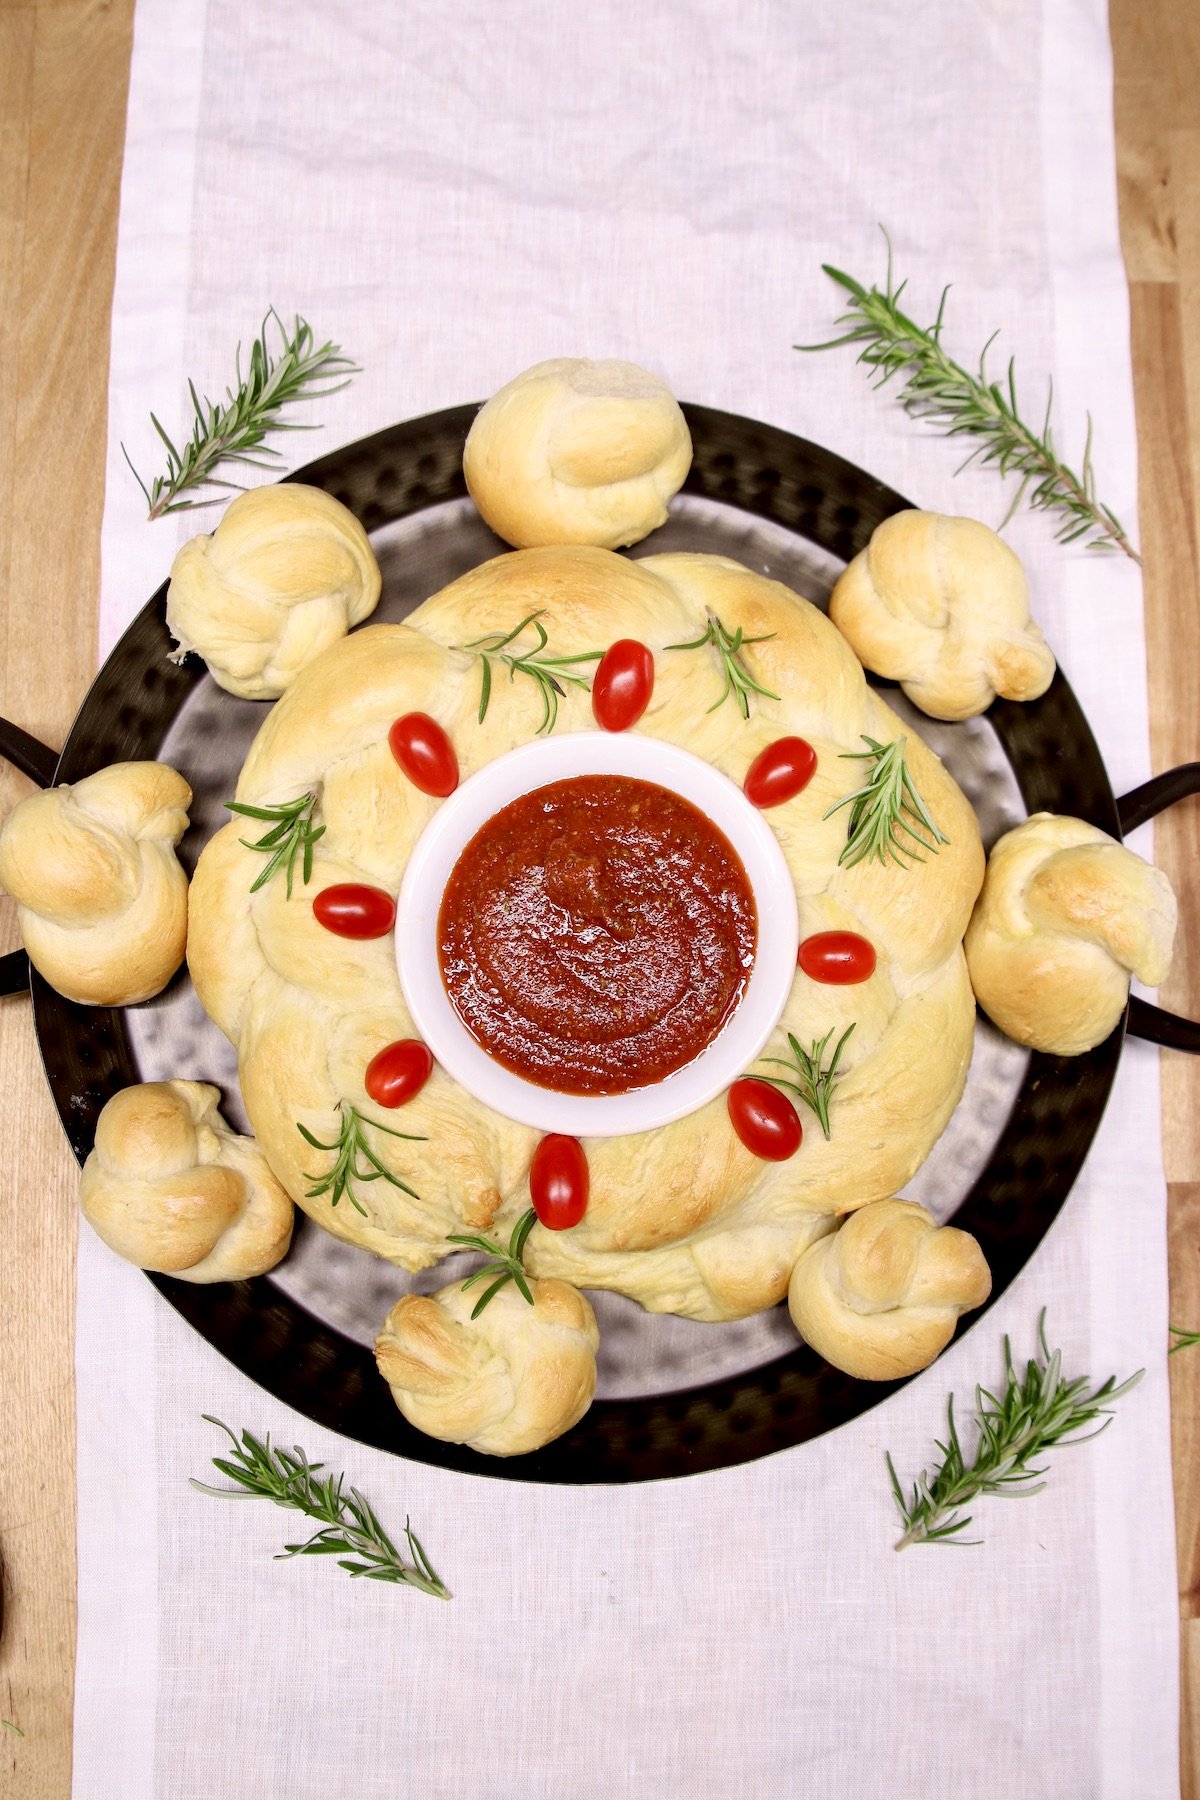 bread wreath with tomatoes and rosemary garnish